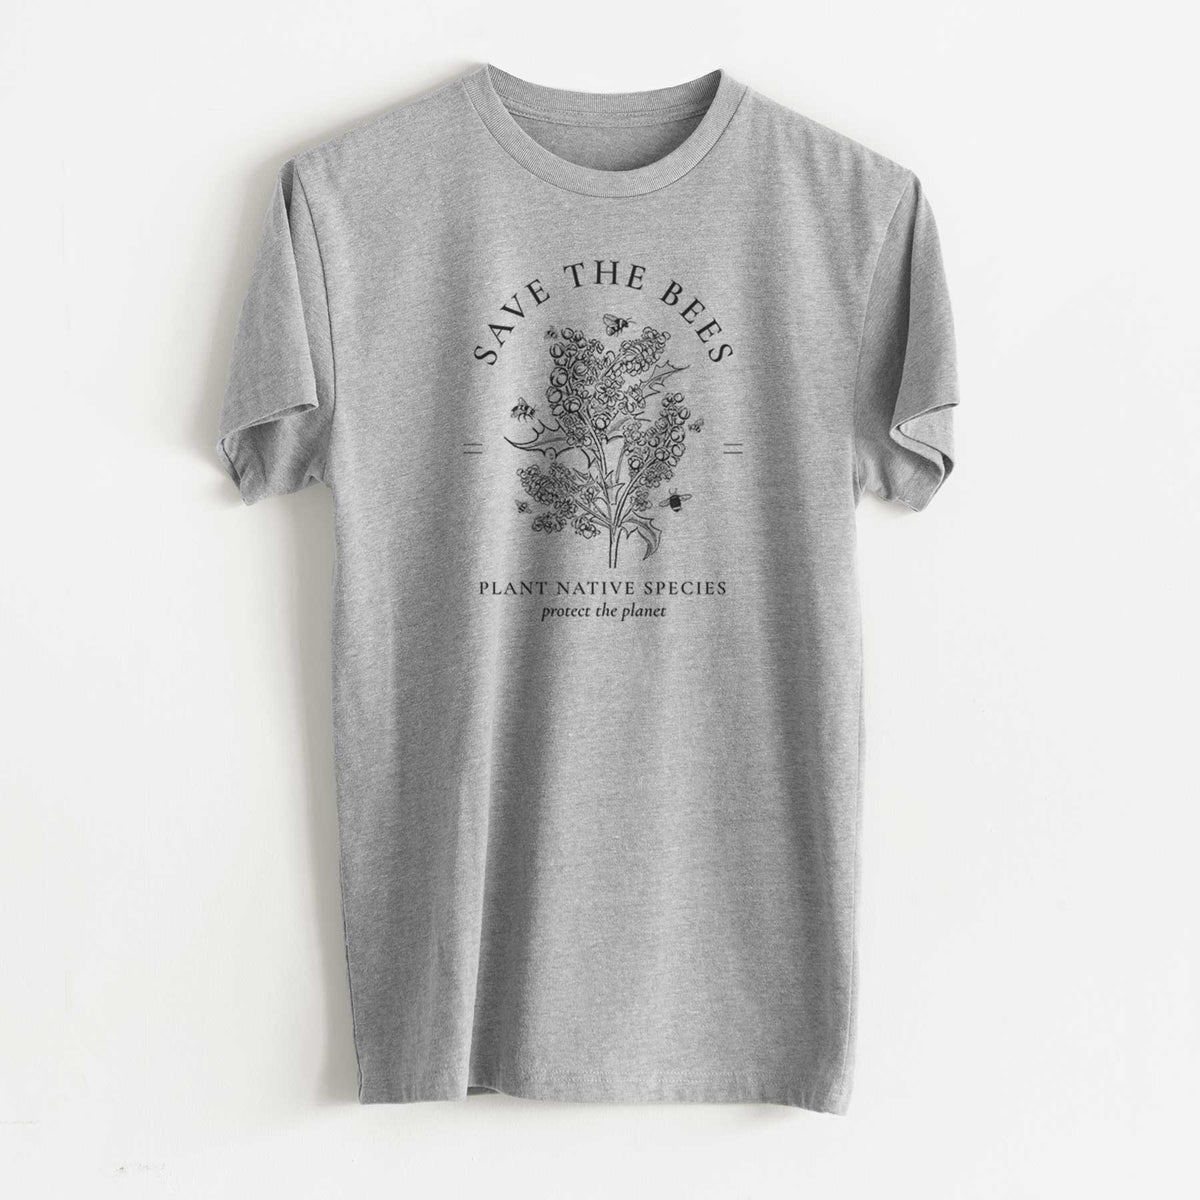 Save the Bees - Plant Native Species - Unisex Recycled Eco Tee  - CLOSEOUT - FINAL SALE